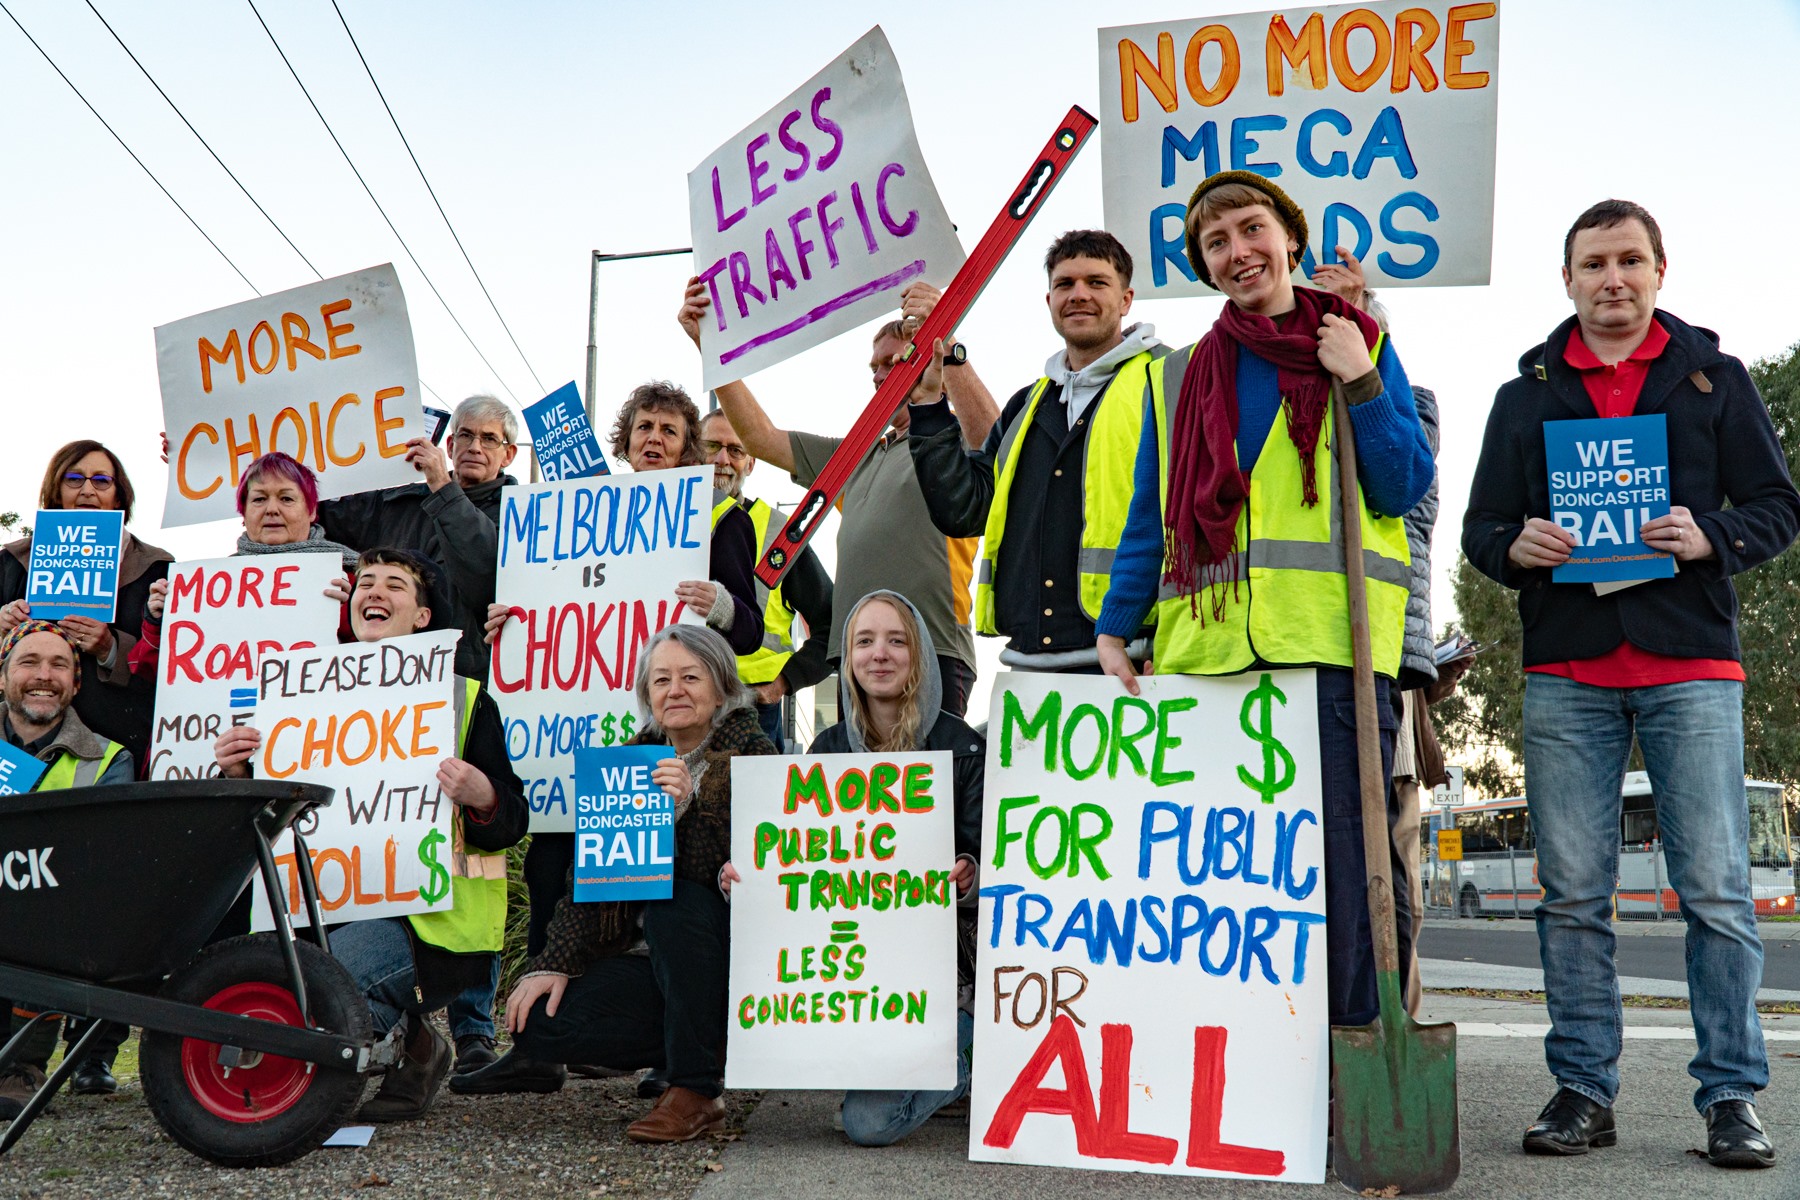 A group of activists of all ages holding signs opposing the construction of new roads and supporting public transport